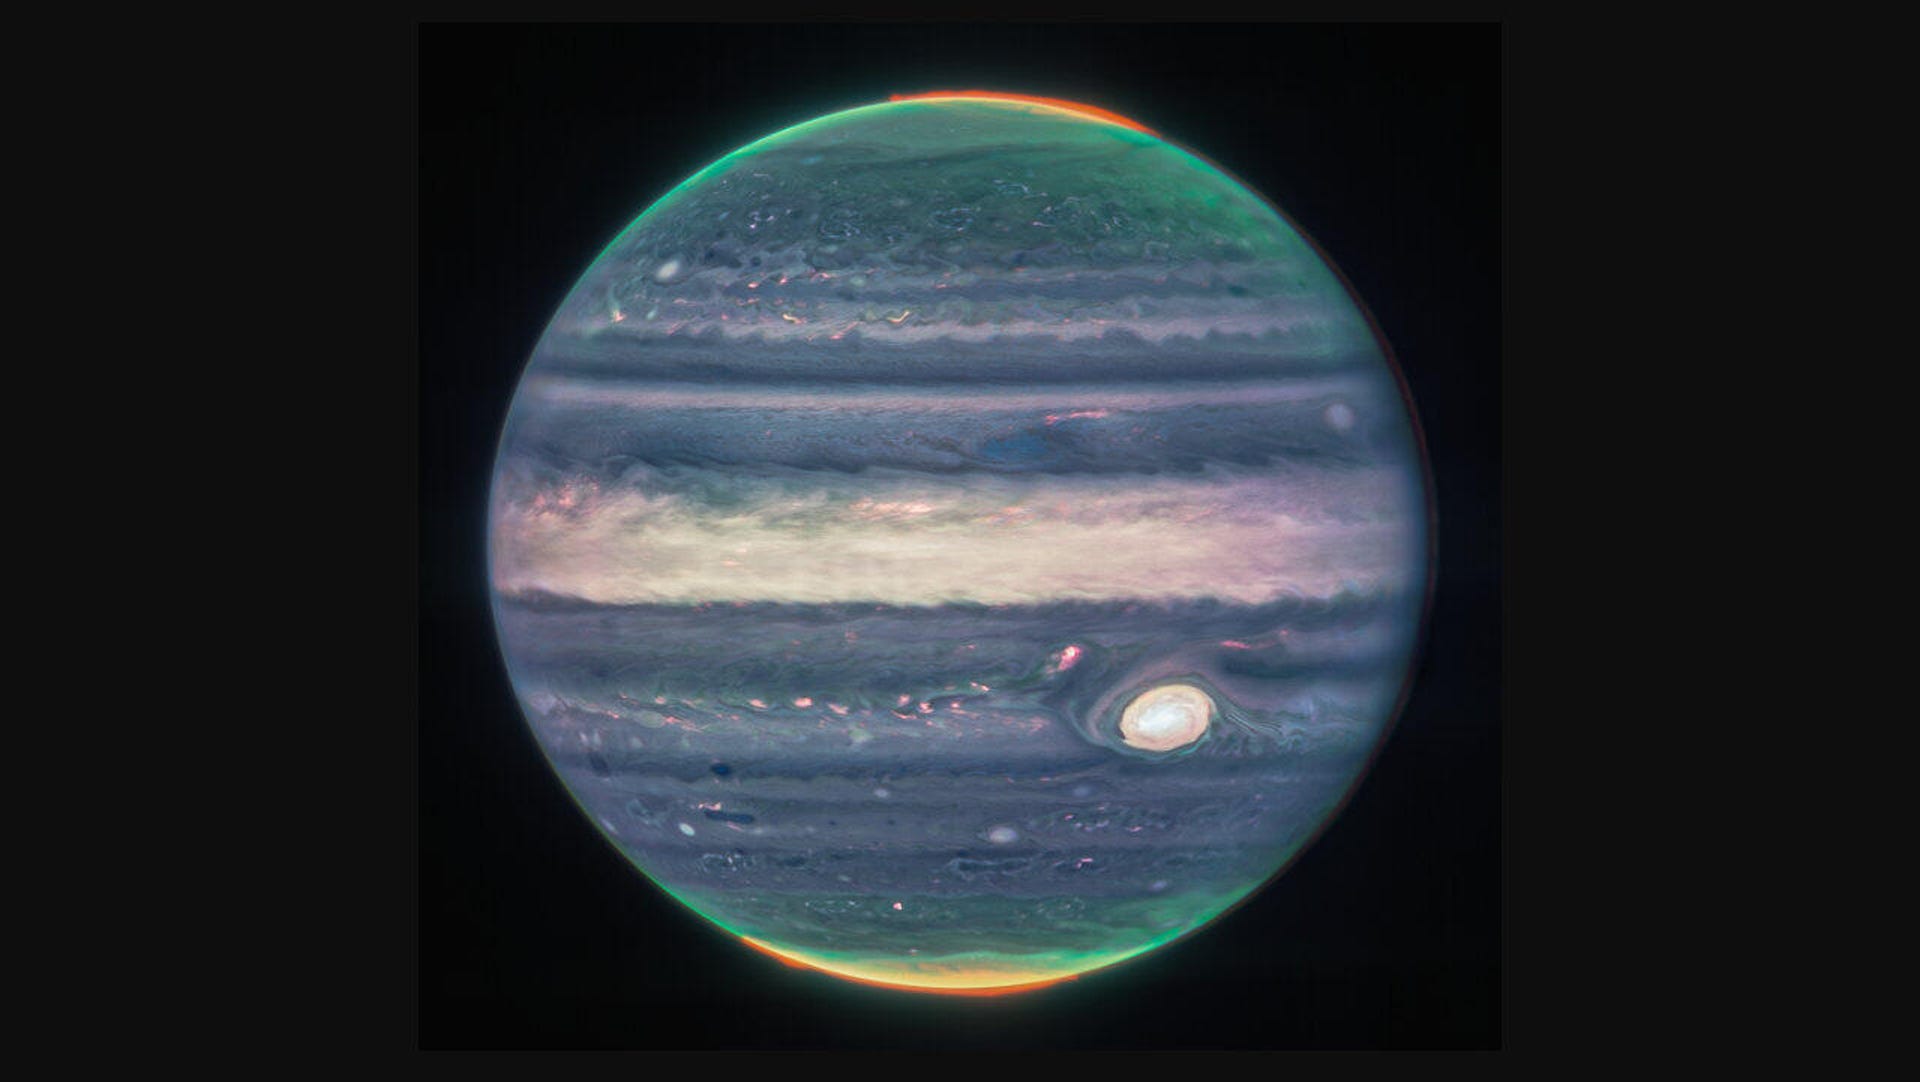 Jupiter appears in swirling shades of blue and purples and white with the Great Red Spot storm looking more like a great white spot.